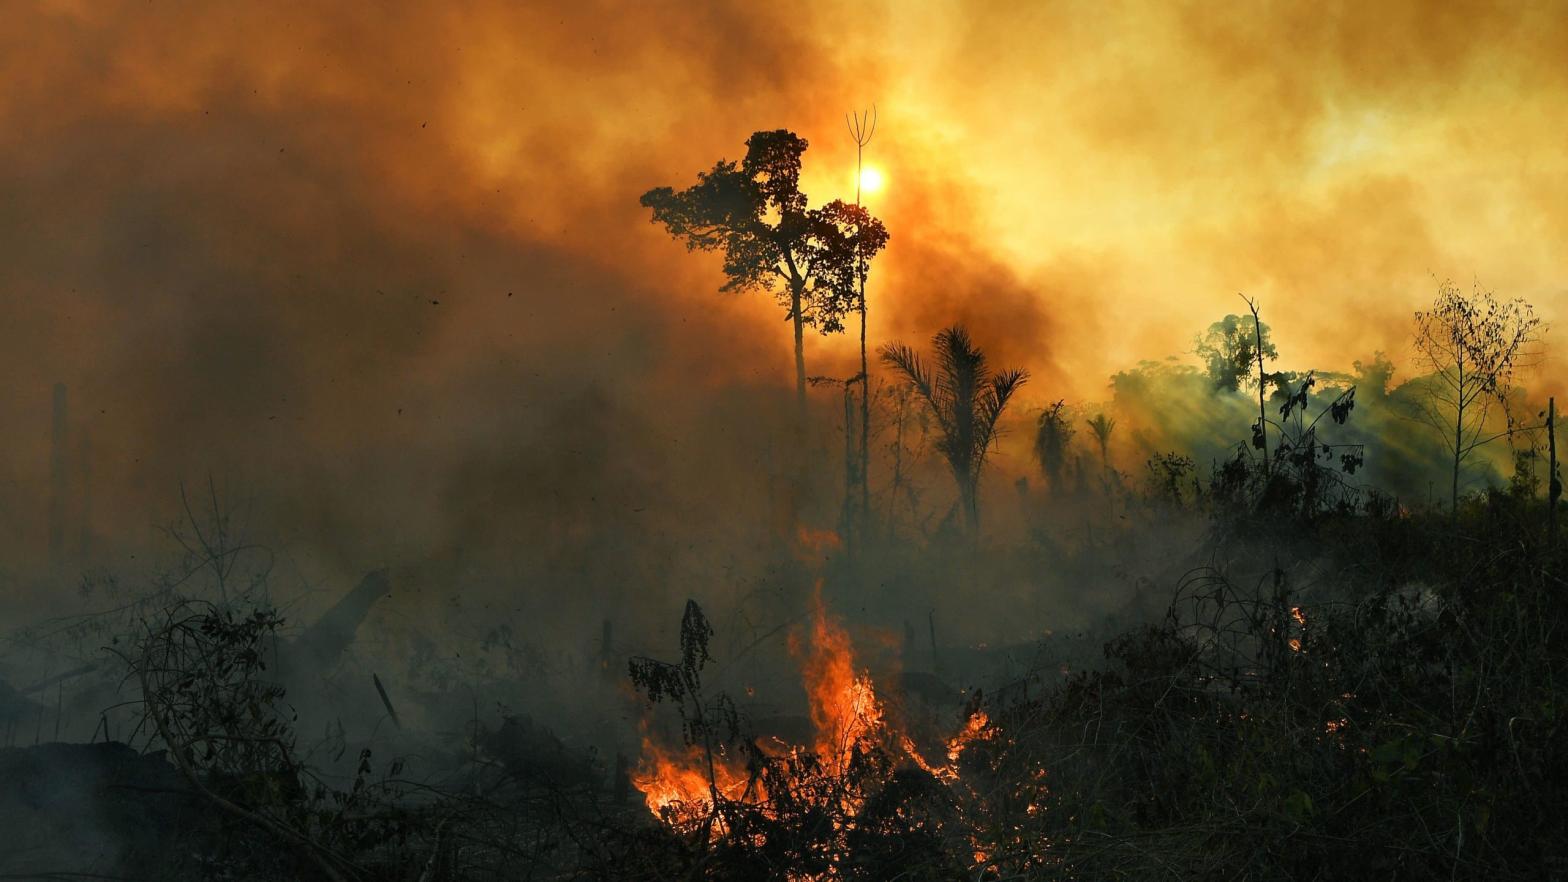 Smoke rises from an illegally lit fire in Amazon rainforest reserve, south of Novo Progresso in Para state, Brazil, on August 15, 2020.  (Photo: Carl De Souza, Getty Images)